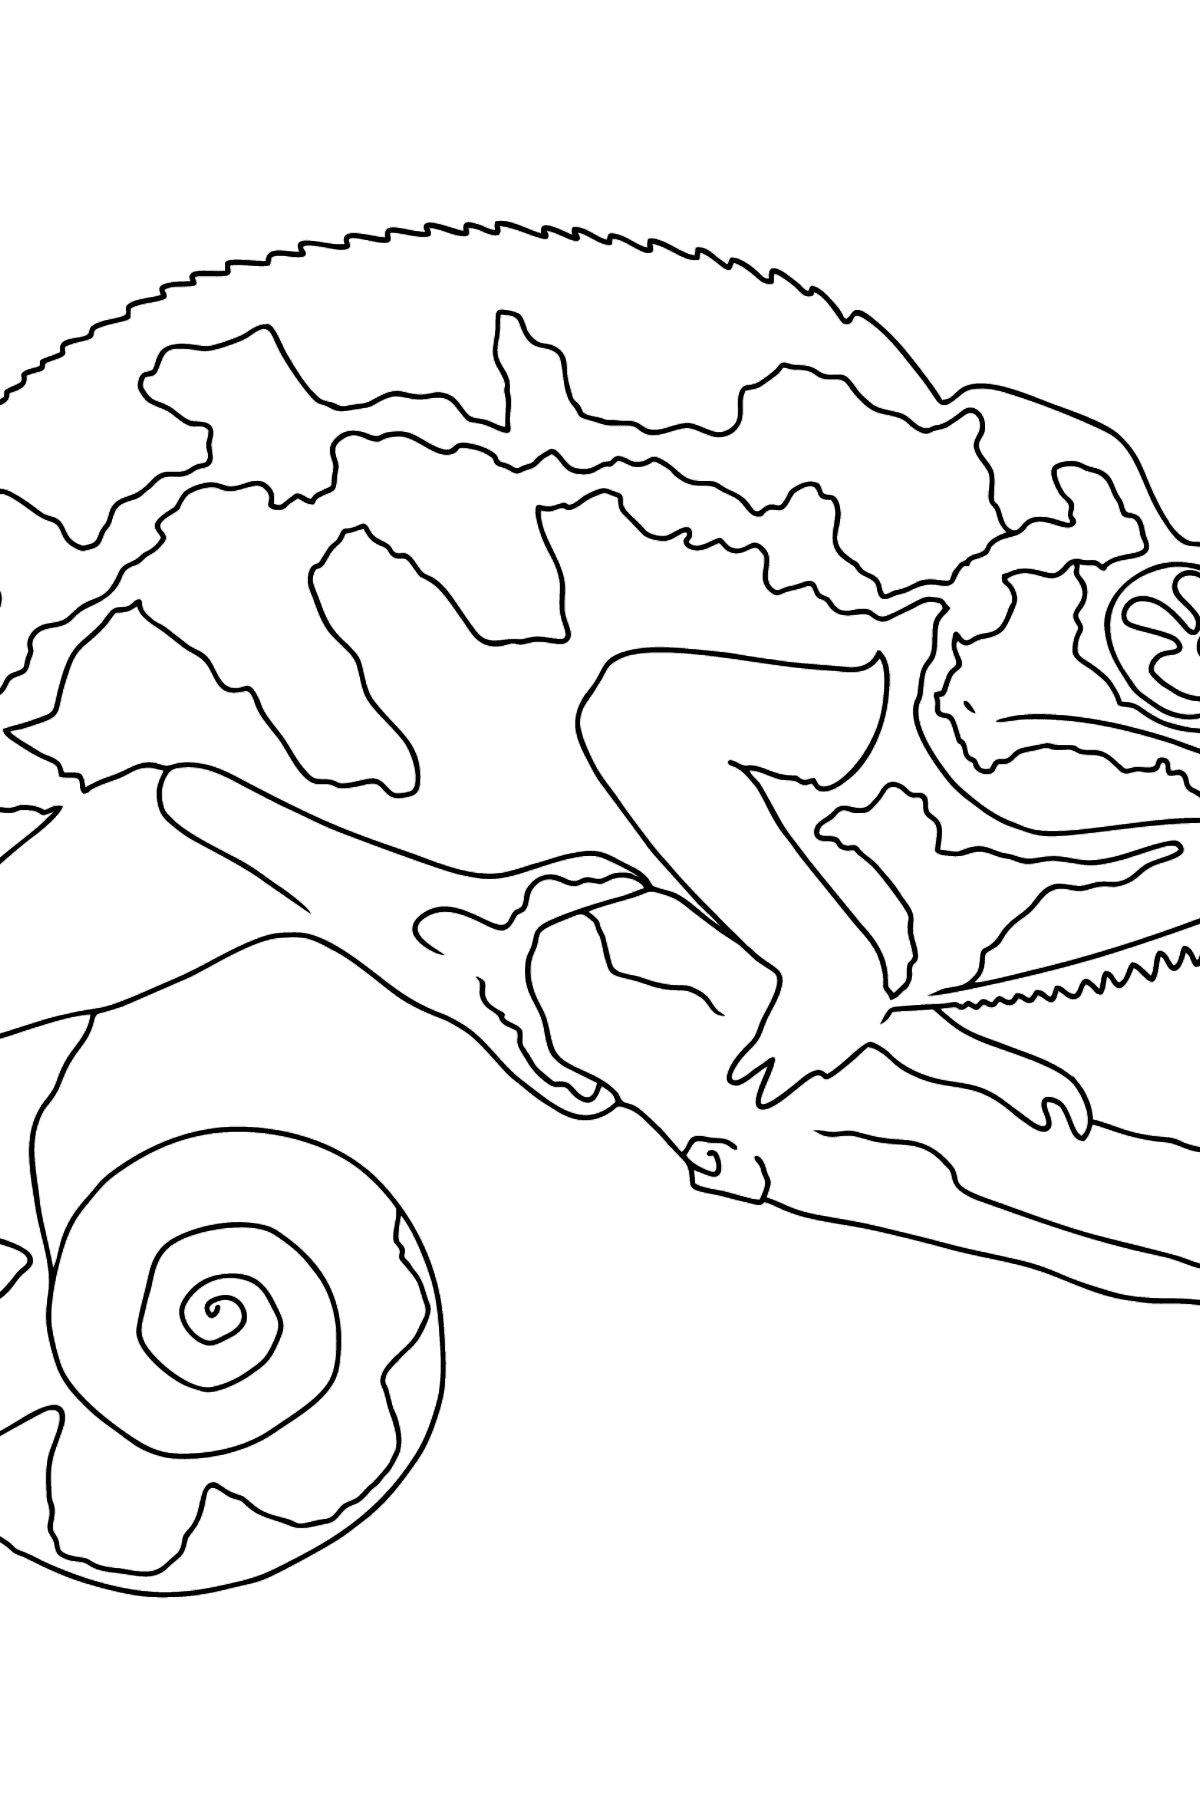 Coloring Page - A Chameleon is Having a Rest - Coloring Pages for Kids